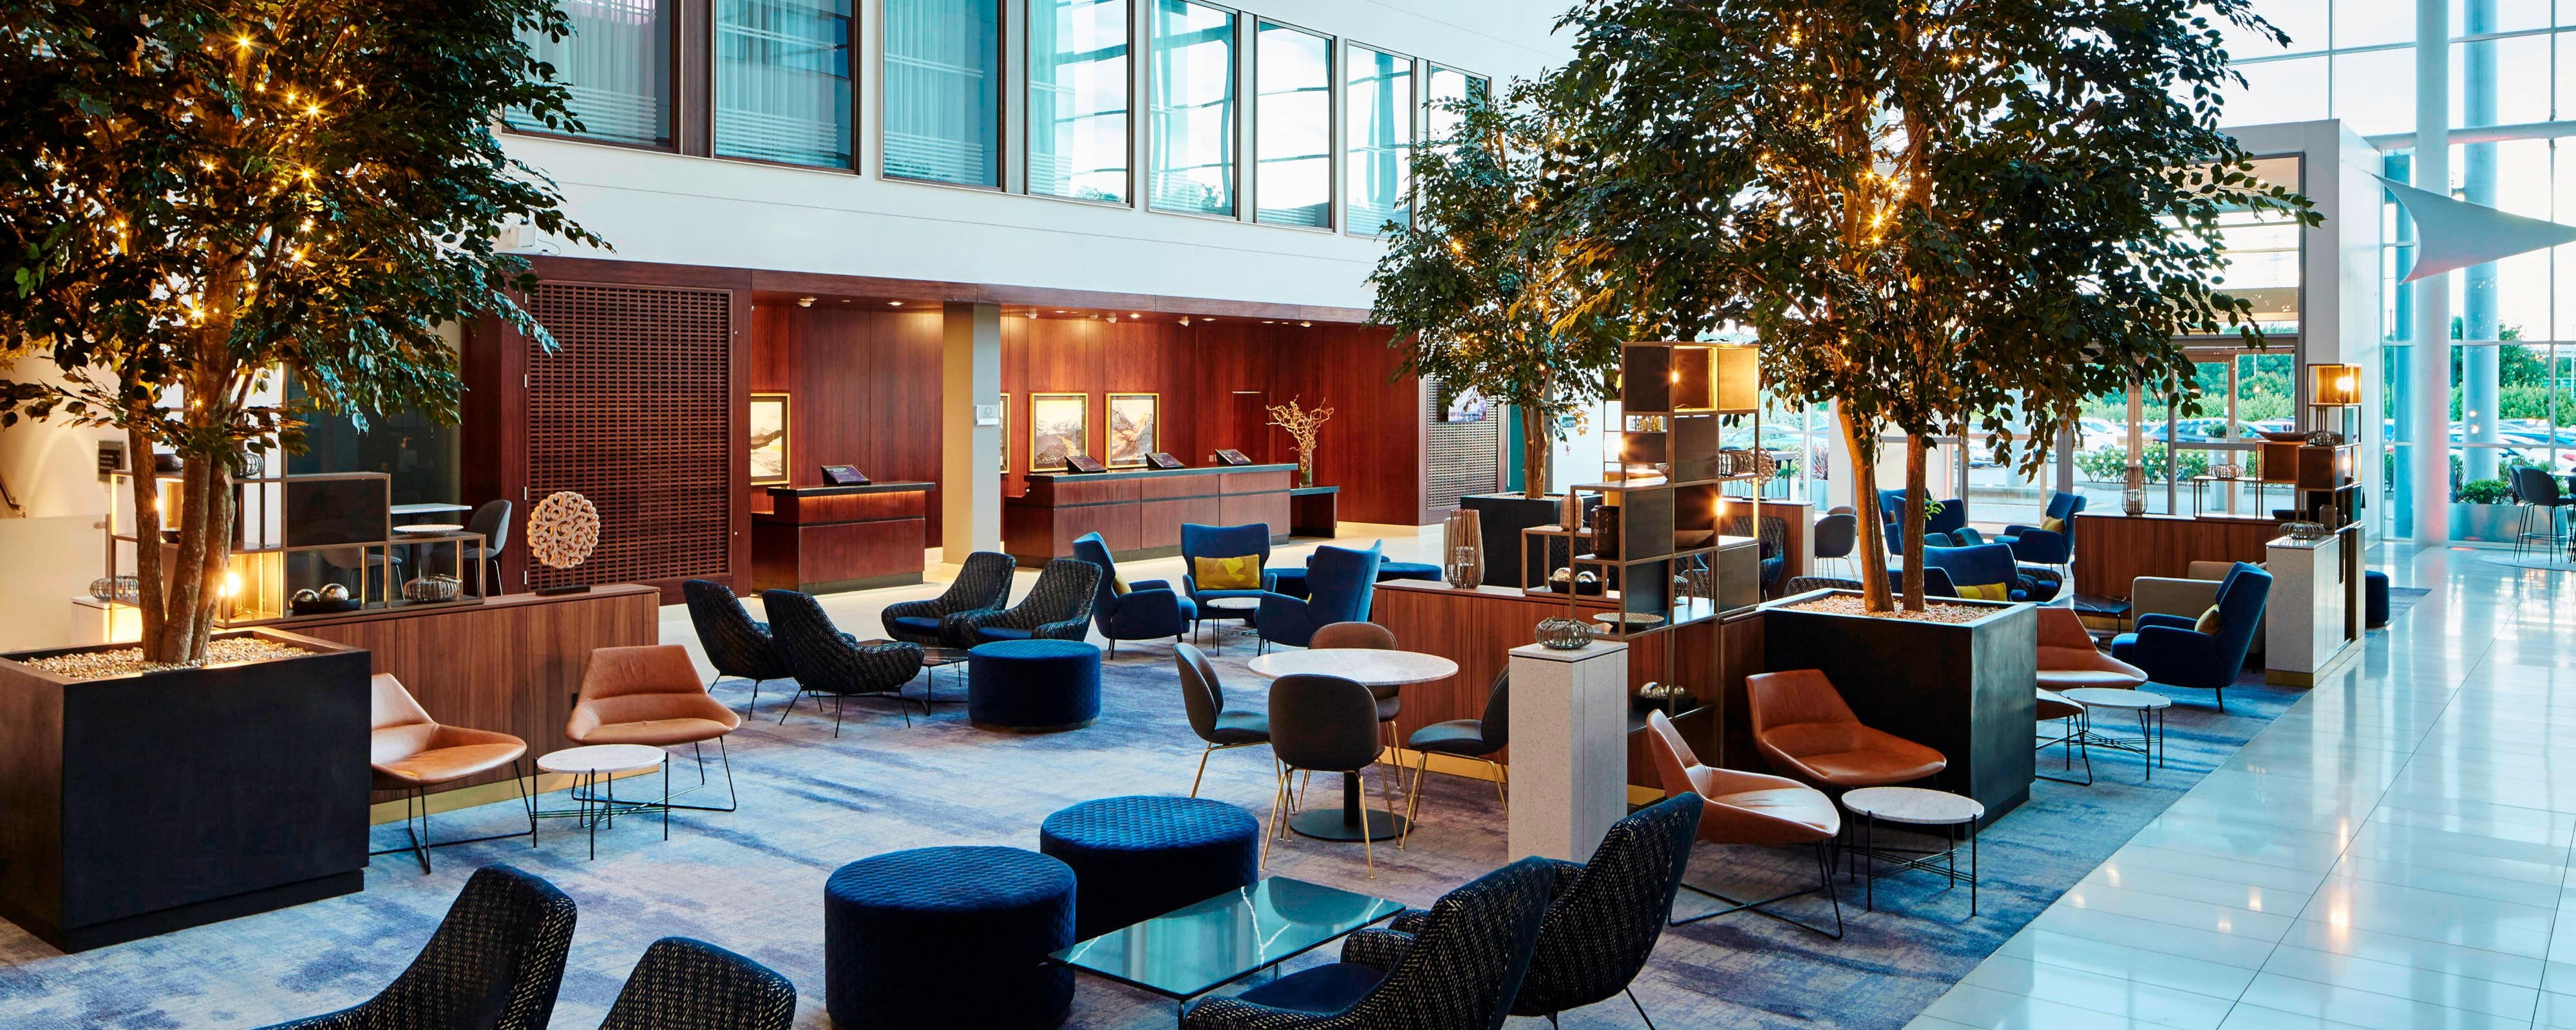 Image for Leicester Marriott Hotel, a Marriott hotel.